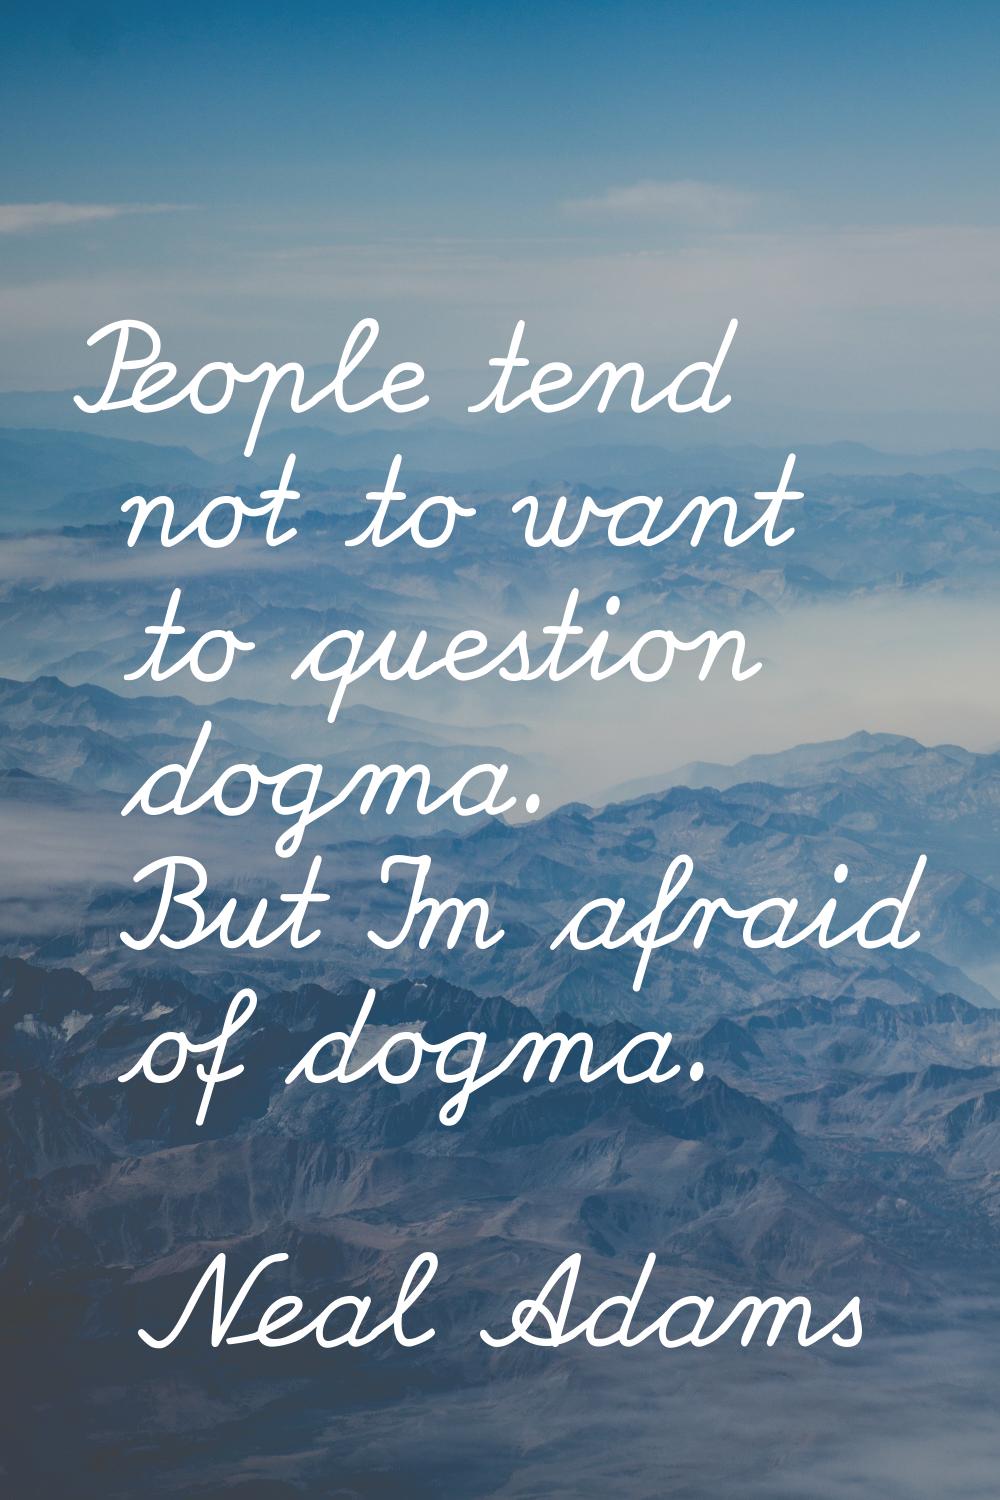 People tend not to want to question dogma. But I'm afraid of dogma.